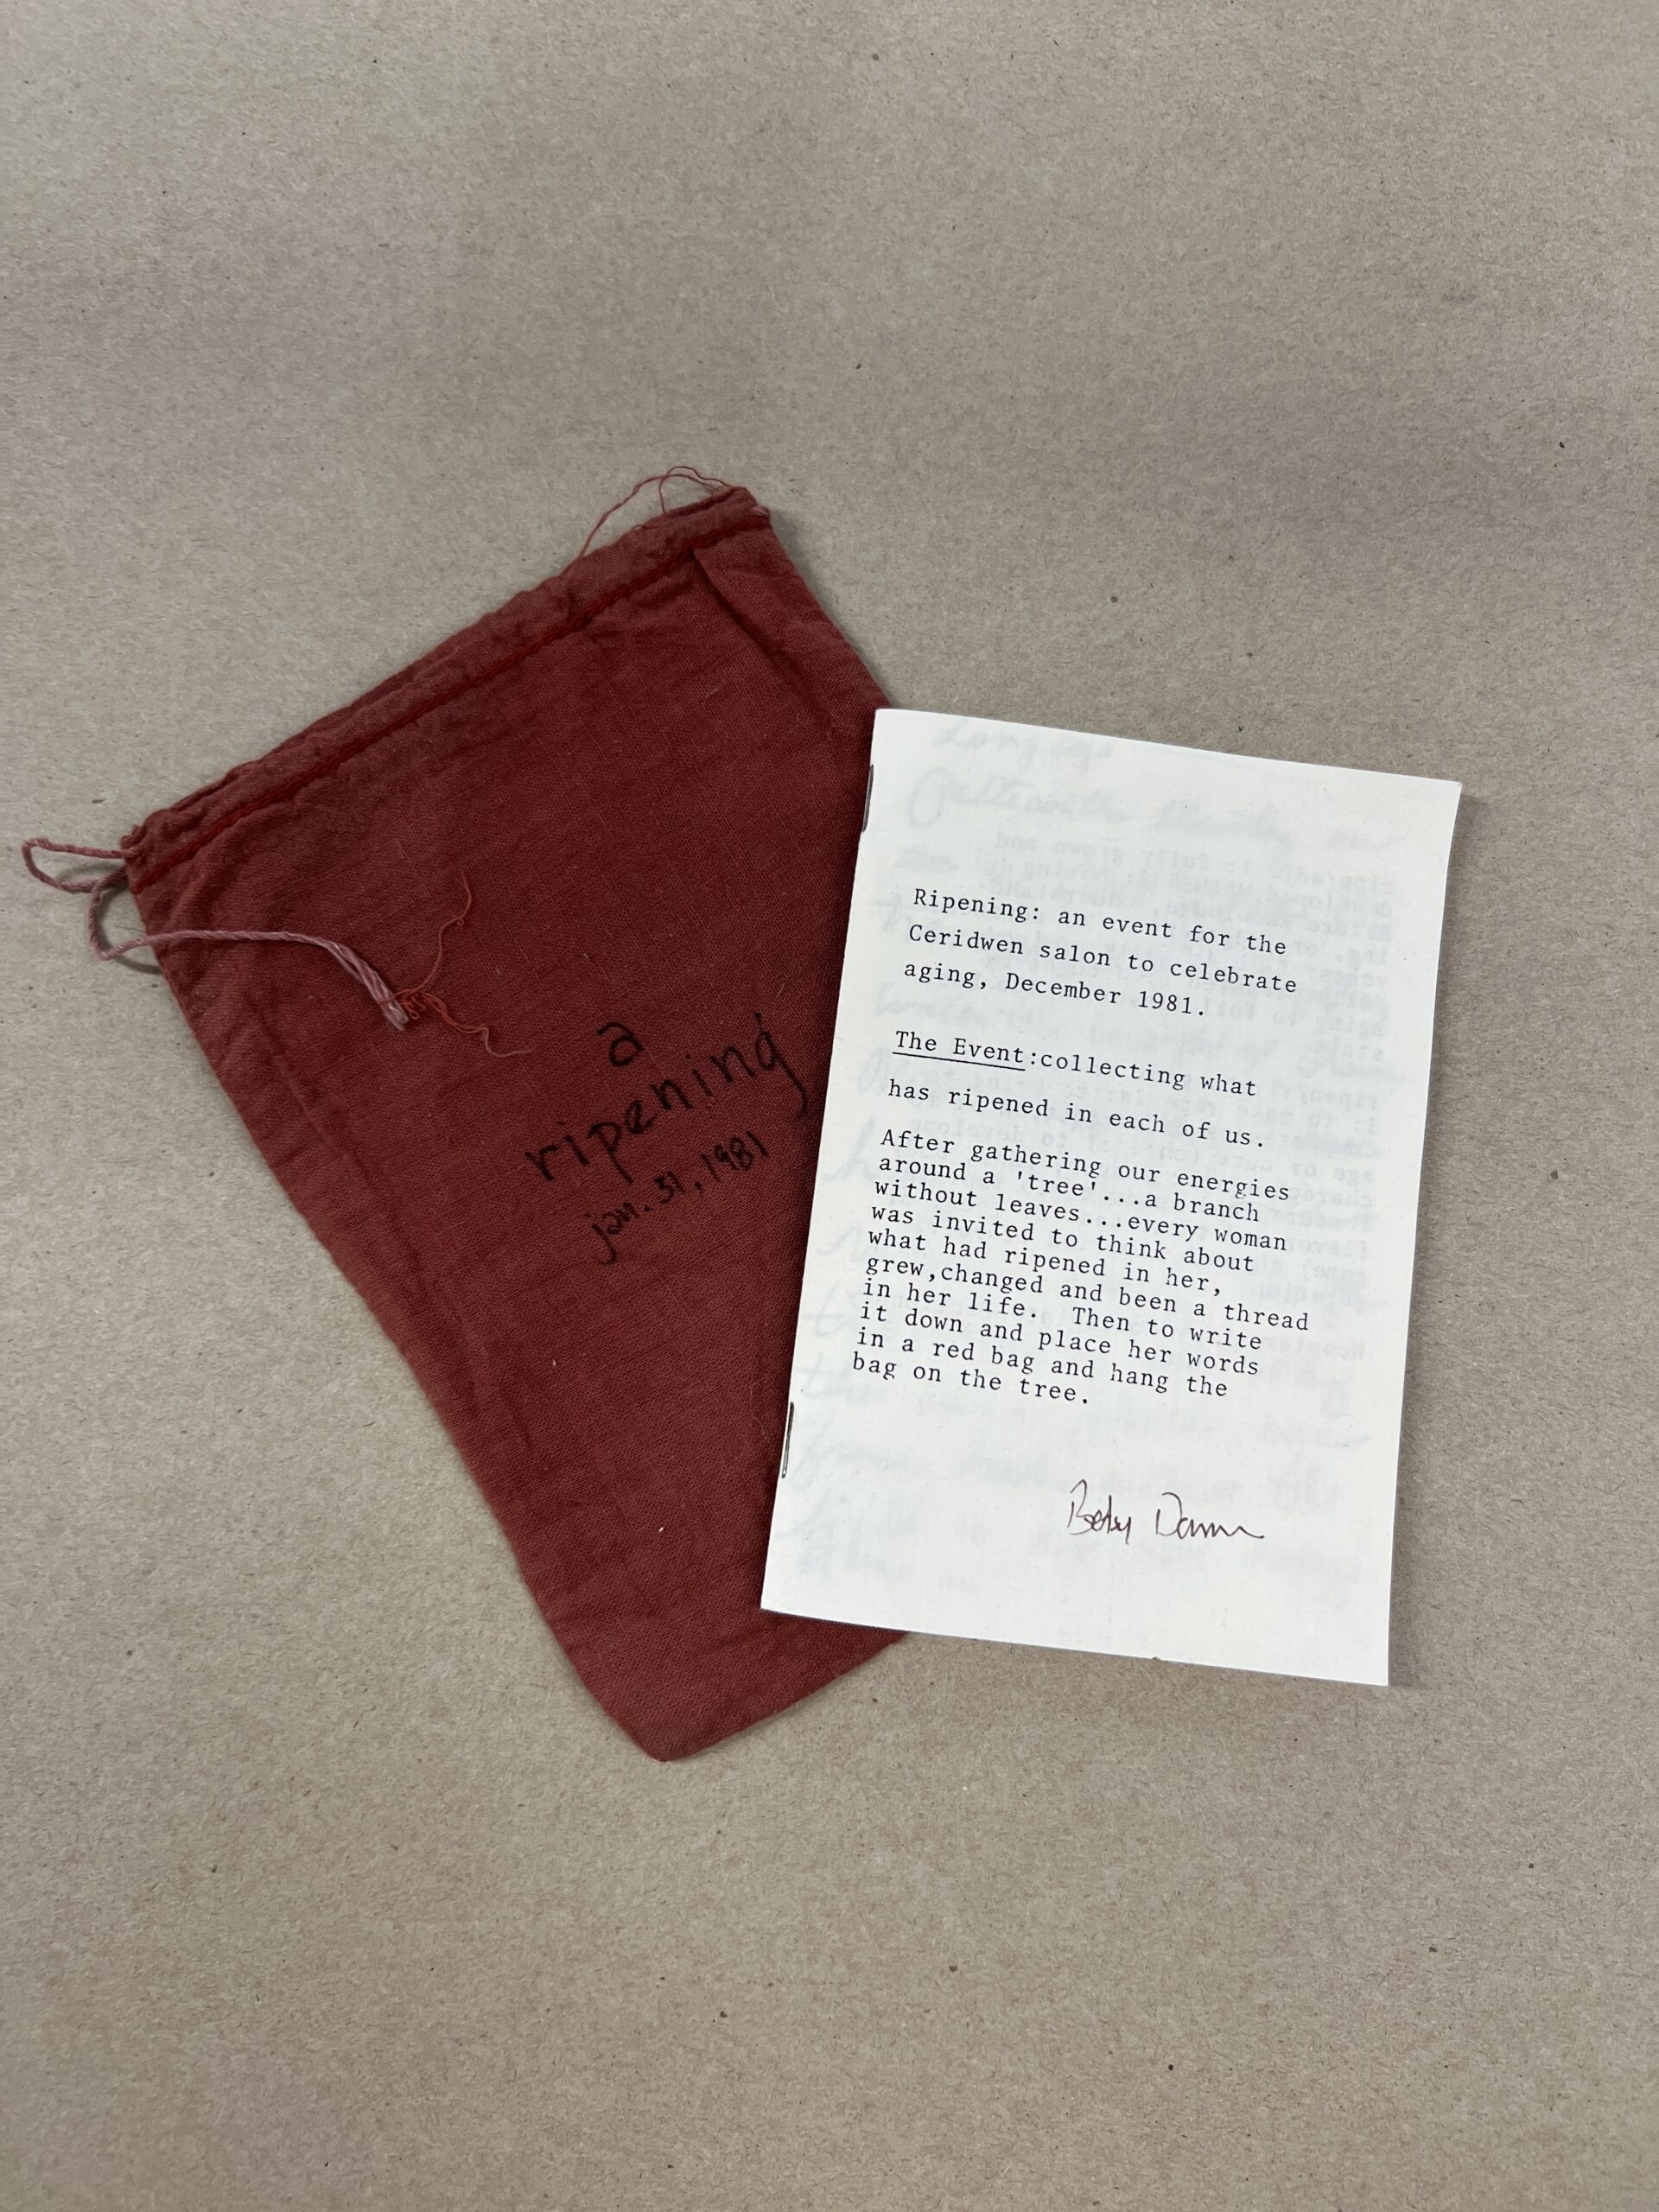 A white pamphlet with black text laying on top of a dark red or crimson pouch that has the words "a ripening" written on it. the pamhplet and pouch are photographed from above and are on a sandy gray background.